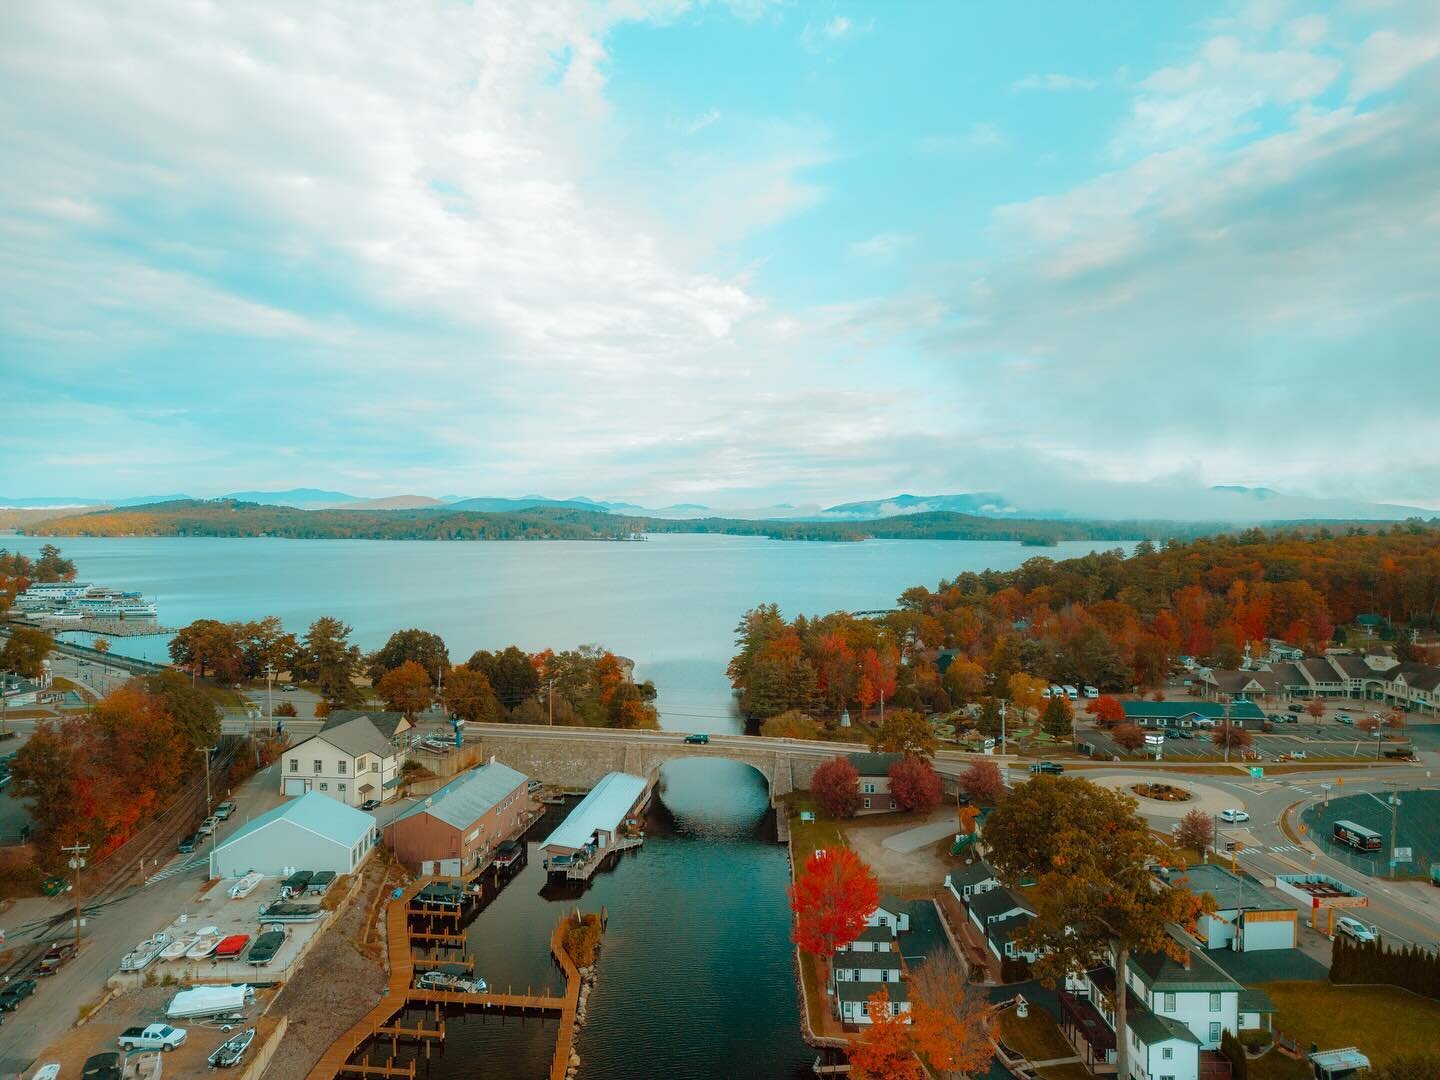 Traveling to New Hampshire during peak fall colors last month was truly an experience. Blankets of yellow and orange colors as far as the eye can see. 

Here are some pieces of content that I had the pleasure of capturing with my drone, including a n